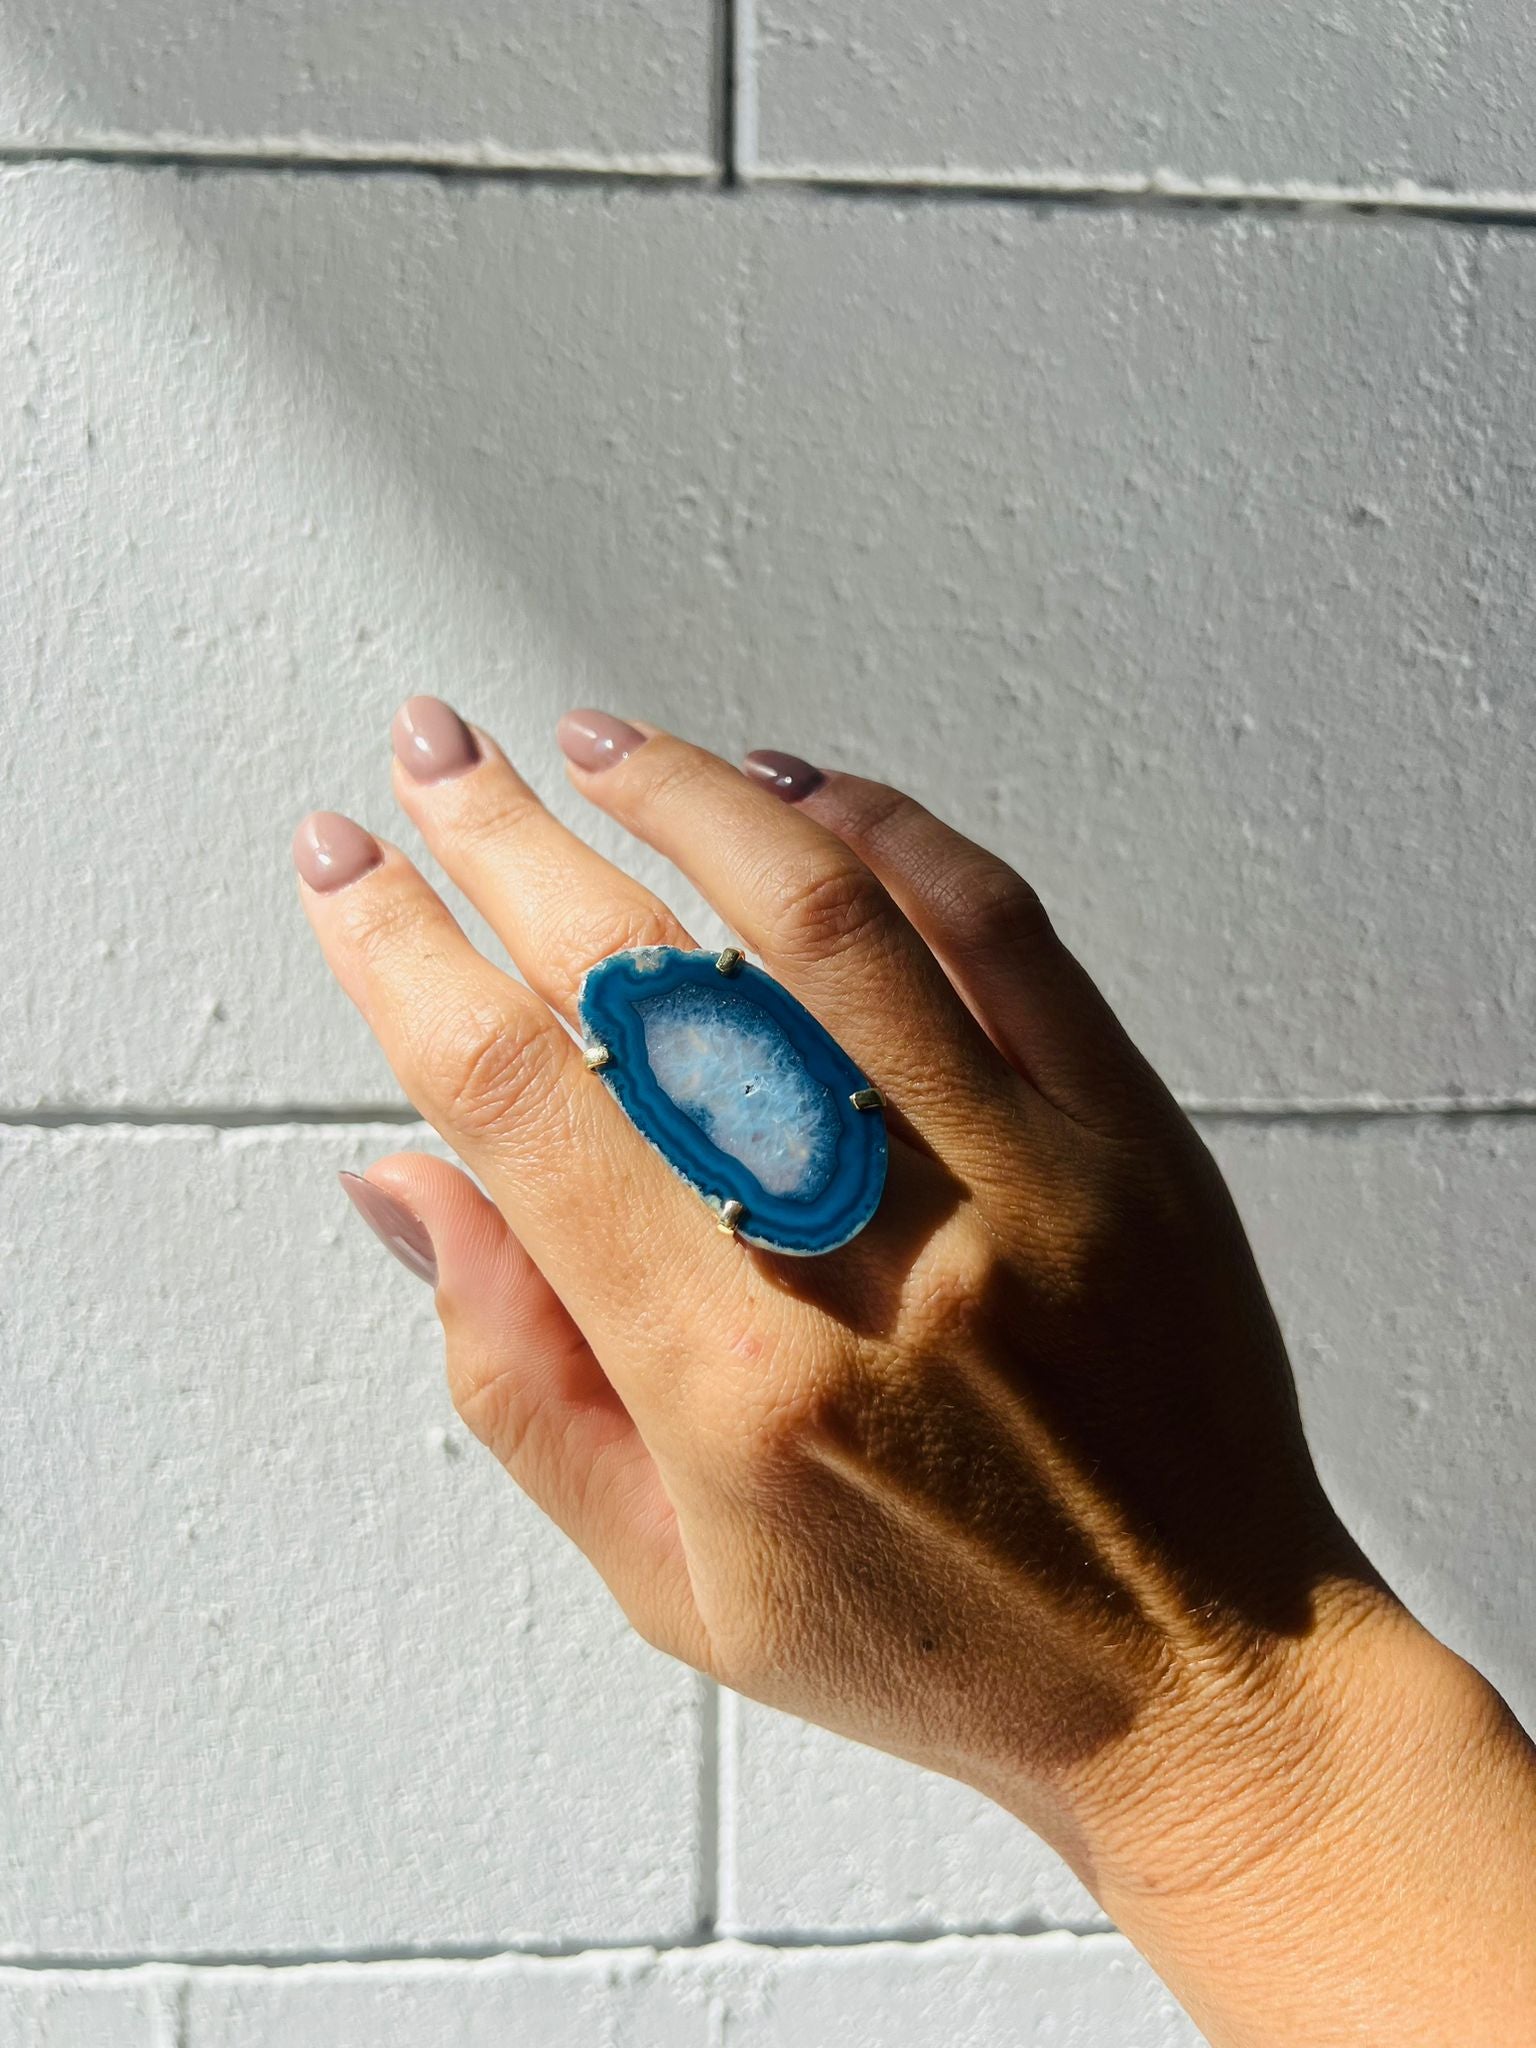 Blue Agate Ring